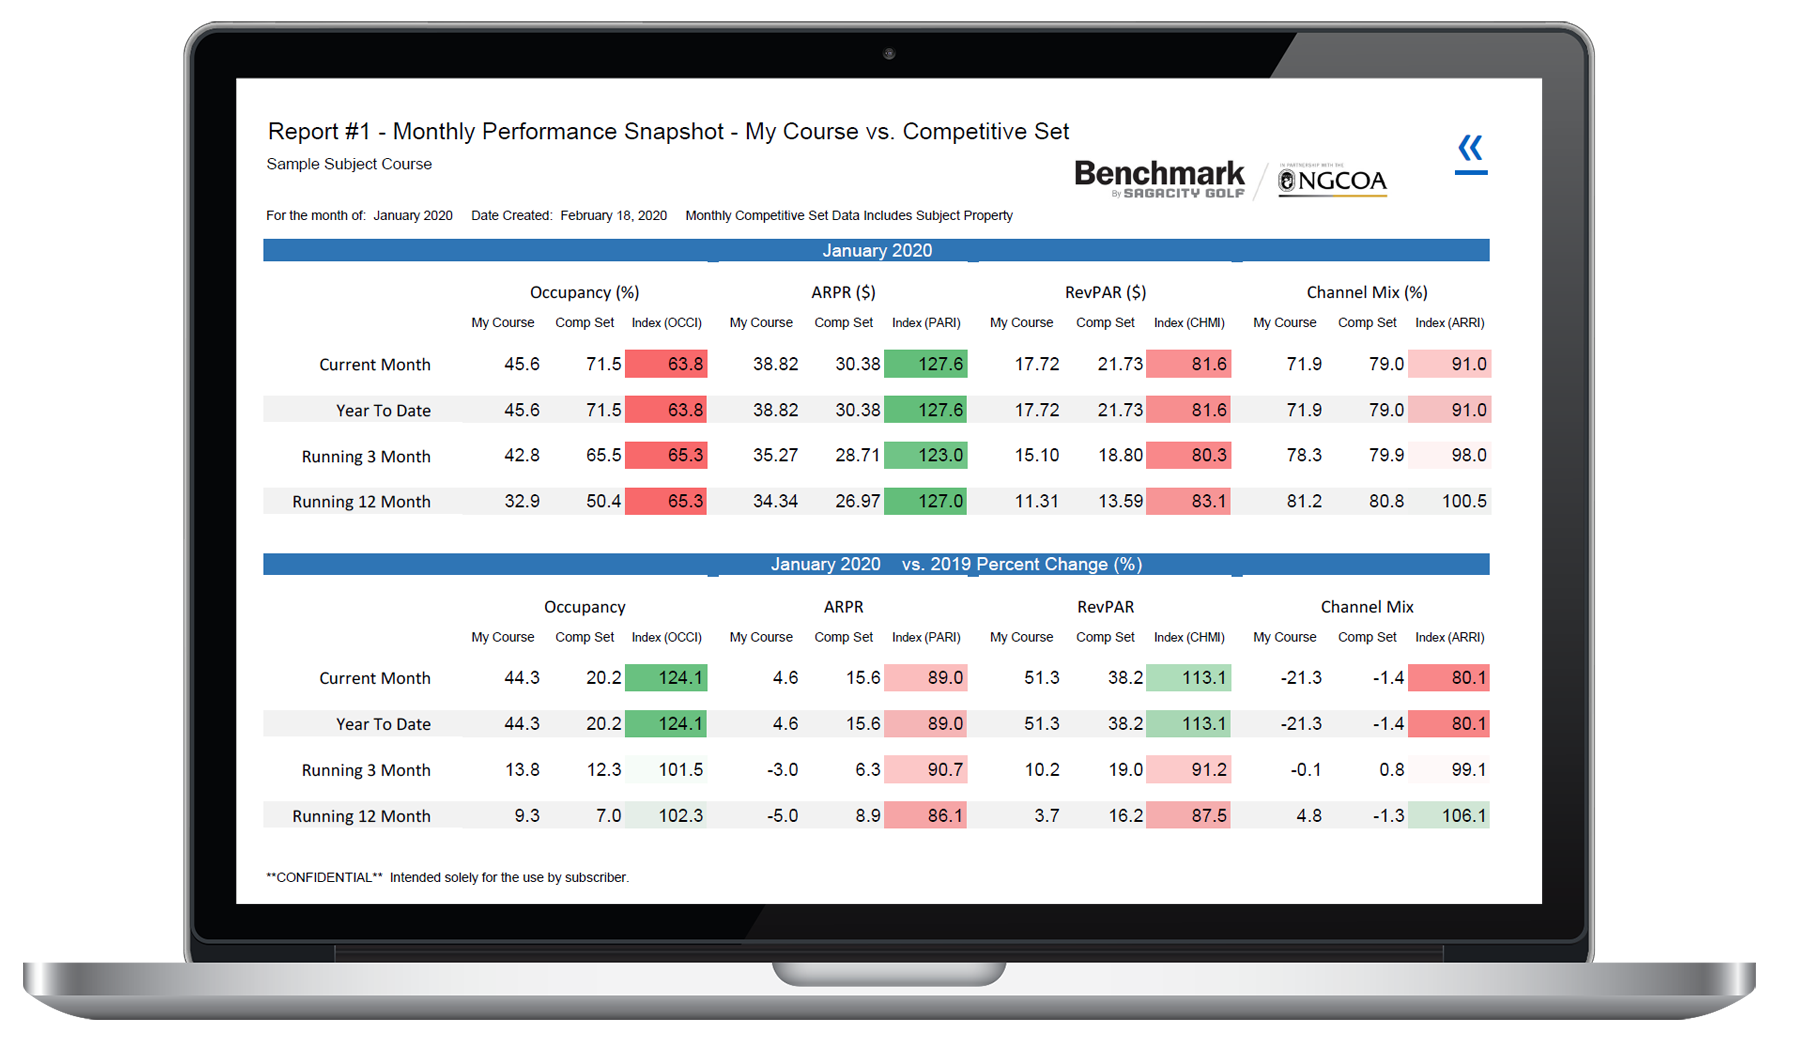 Benchmark delivers an in-depth analysis to help you understand the performance of your tee sheet compared to the local market, including your direct competitors.